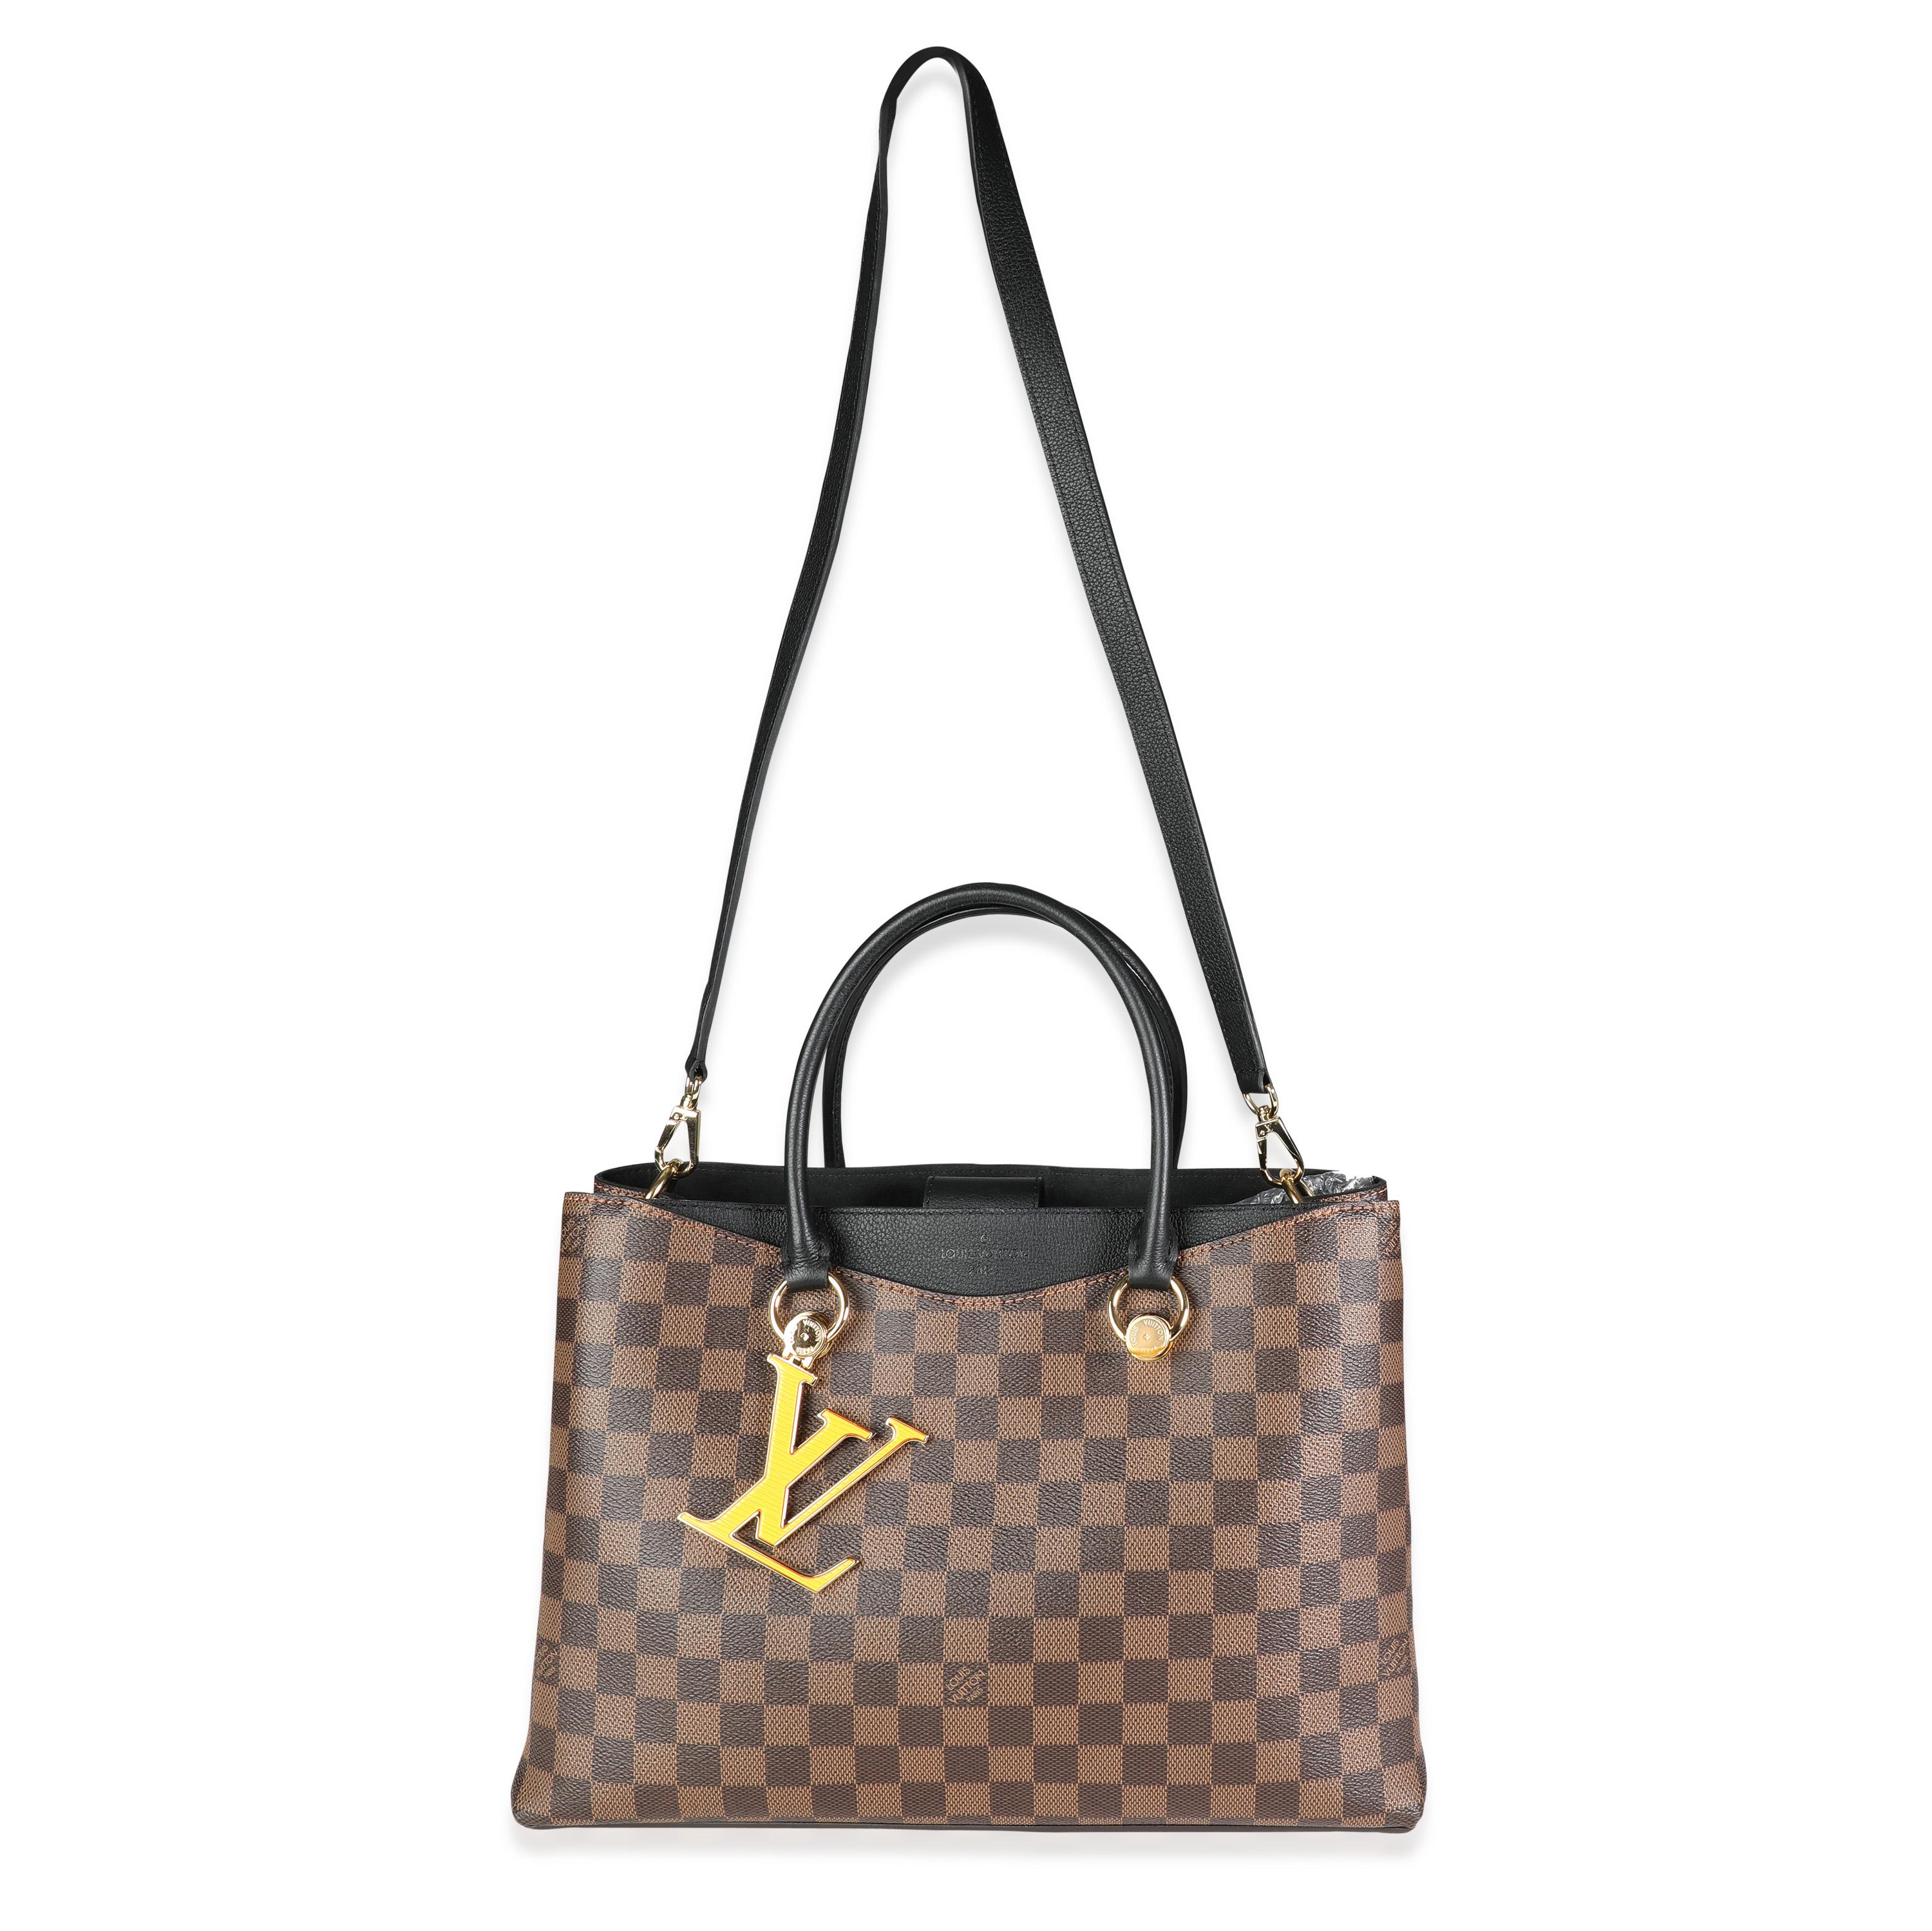 Listing Title: Louis Vuitton Black Taurillon Leather & Damier Ebene Canvas LV Riverside Tote
SKU: 117385
MSRP: 2800.00
Condition: Pre-owned (3000)
Handbag Condition: Excellent
Condition Comments: Very Good Condition. Plastic on some hardware.